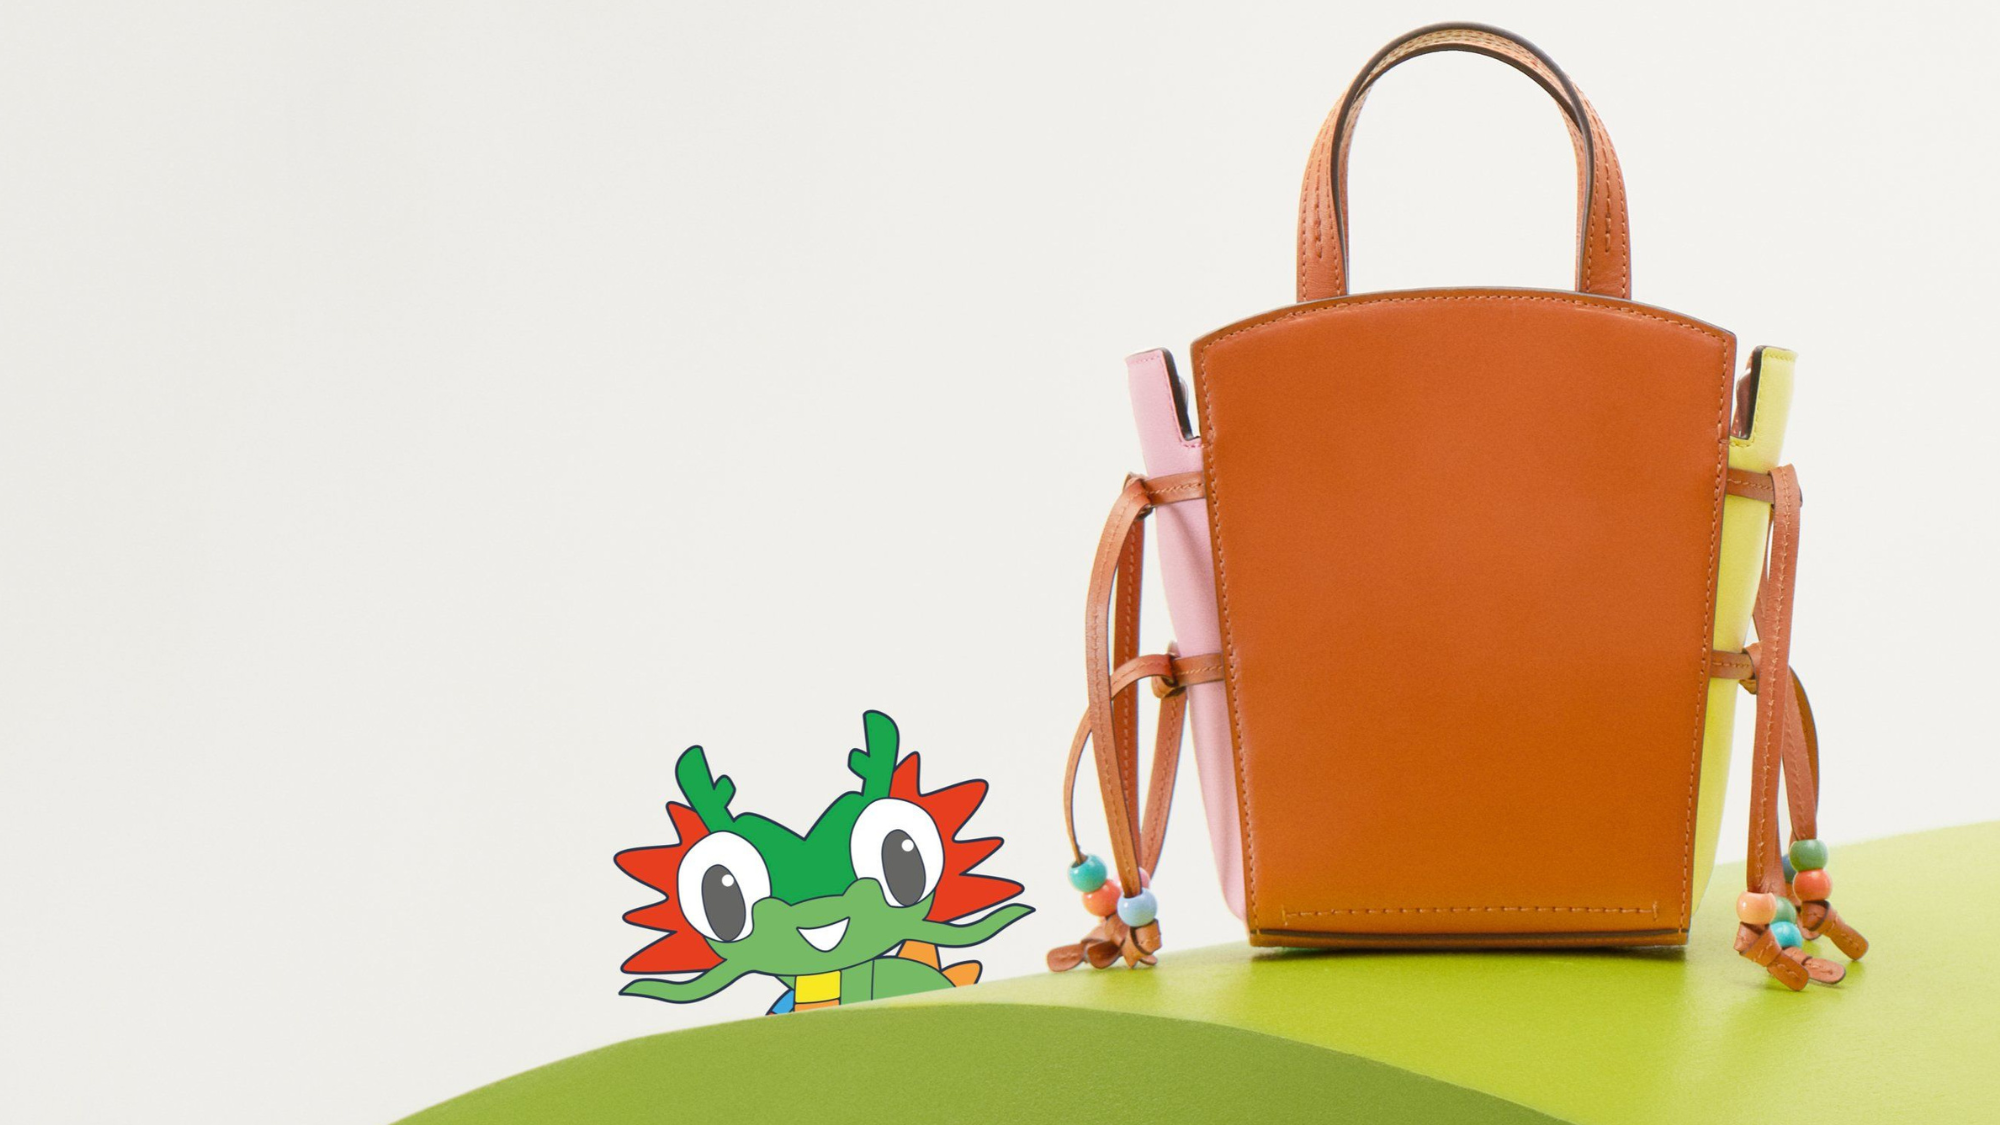 MCM, Loewe, and Mulberry welcome the Year of the Dragon